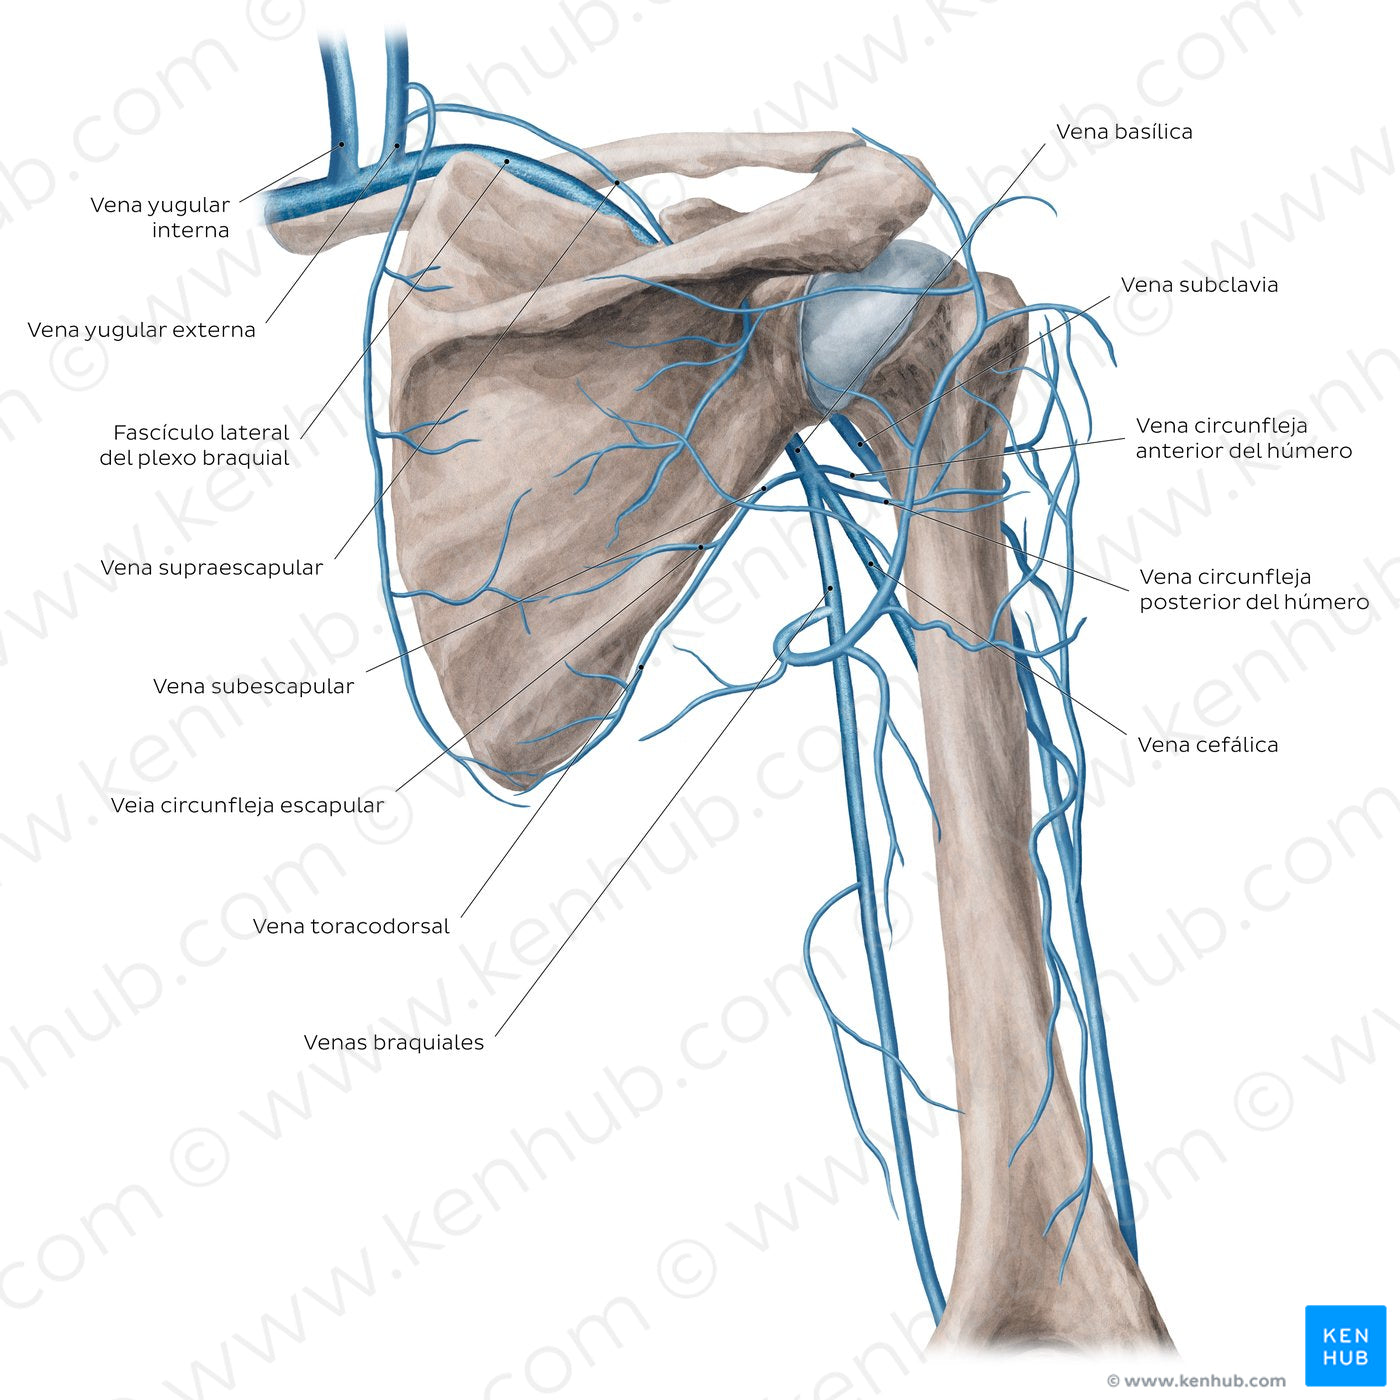 Veins of the arm and the shoulder - Posterior view (Spanish)